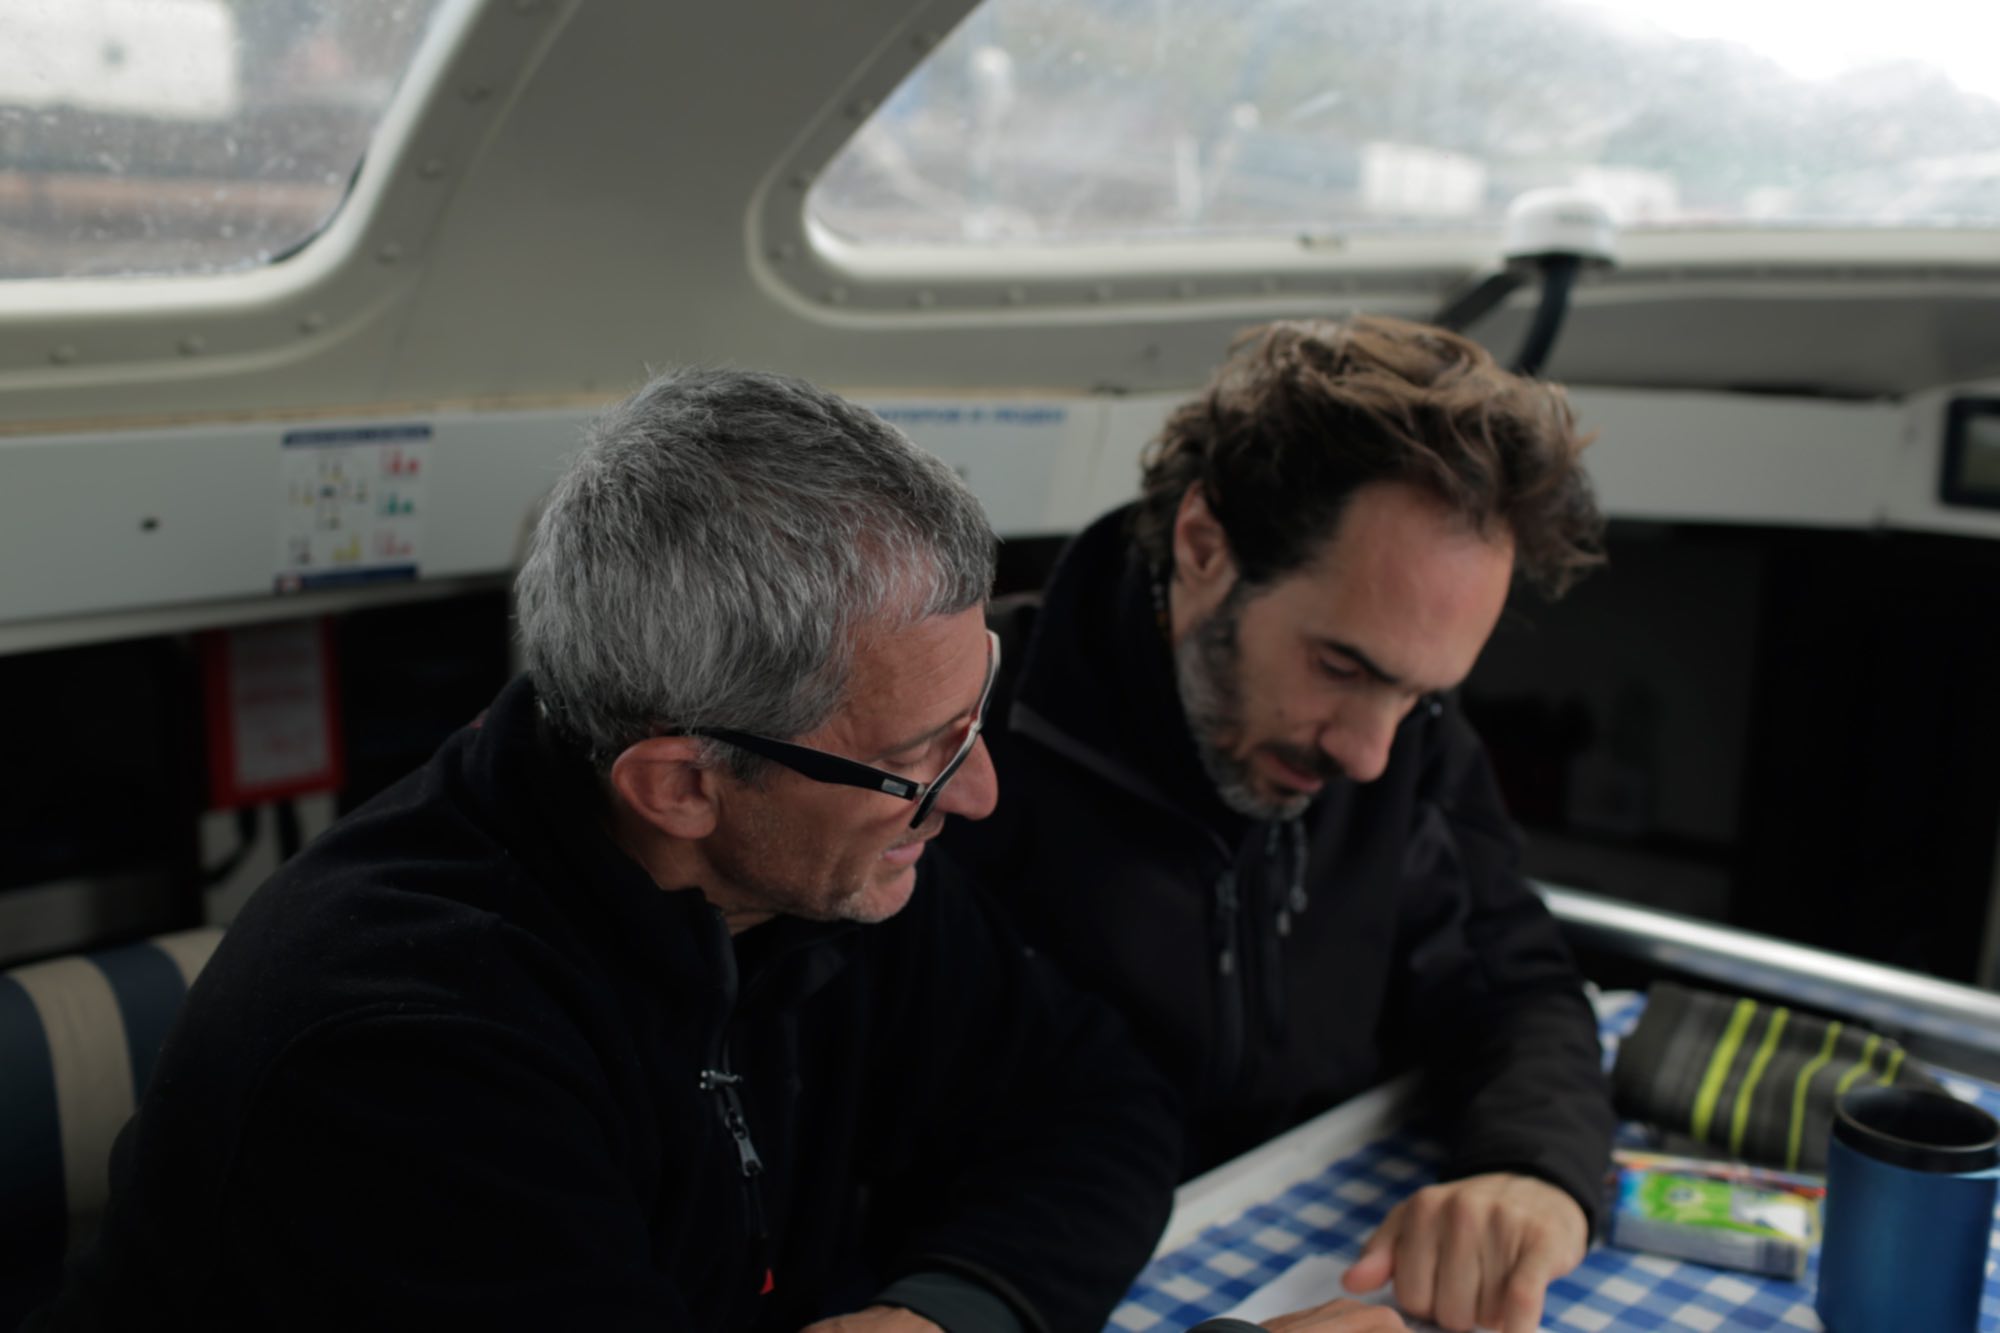 Albert Bargués observing a nautical chart together with the writer and scriptwriter Javier Argüello.